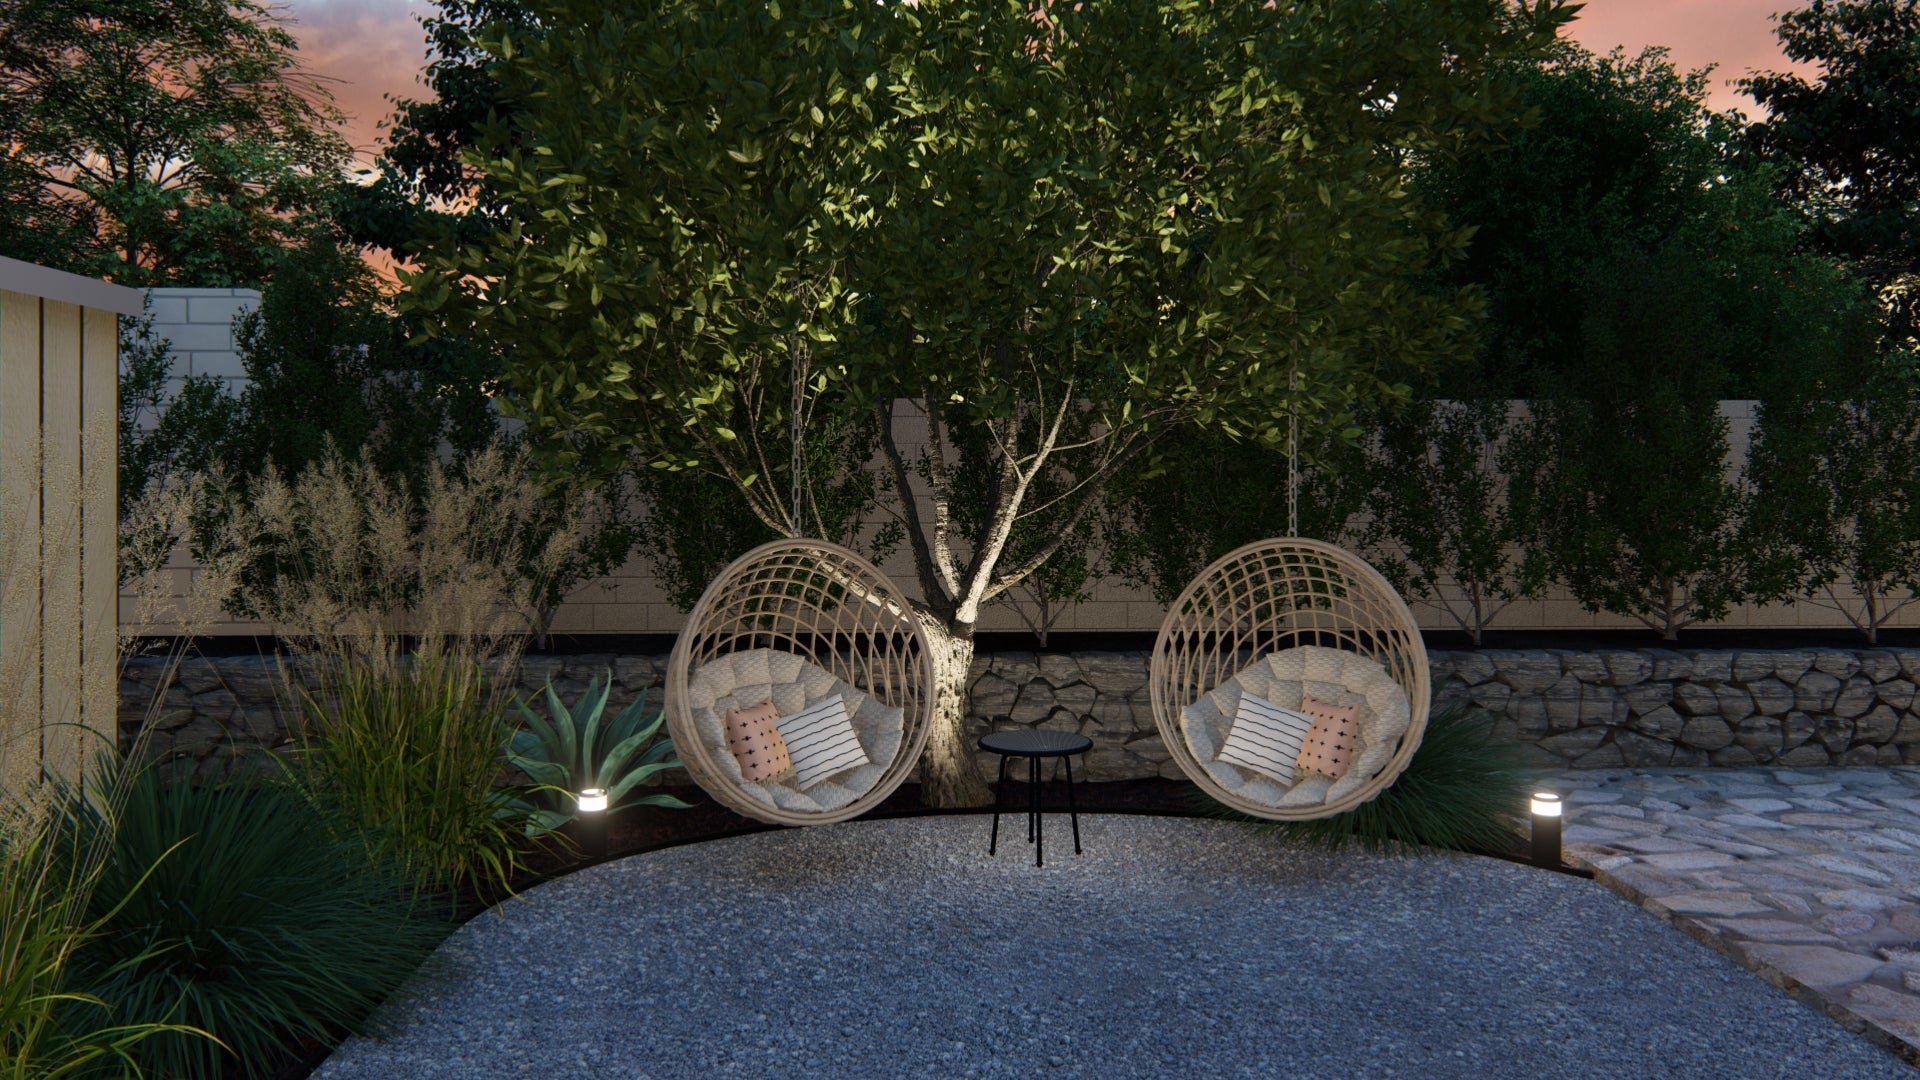 The same minimalist path lights flank a pair of basket chairs, while an uplight highlights the central tree as a sculptural focal point.